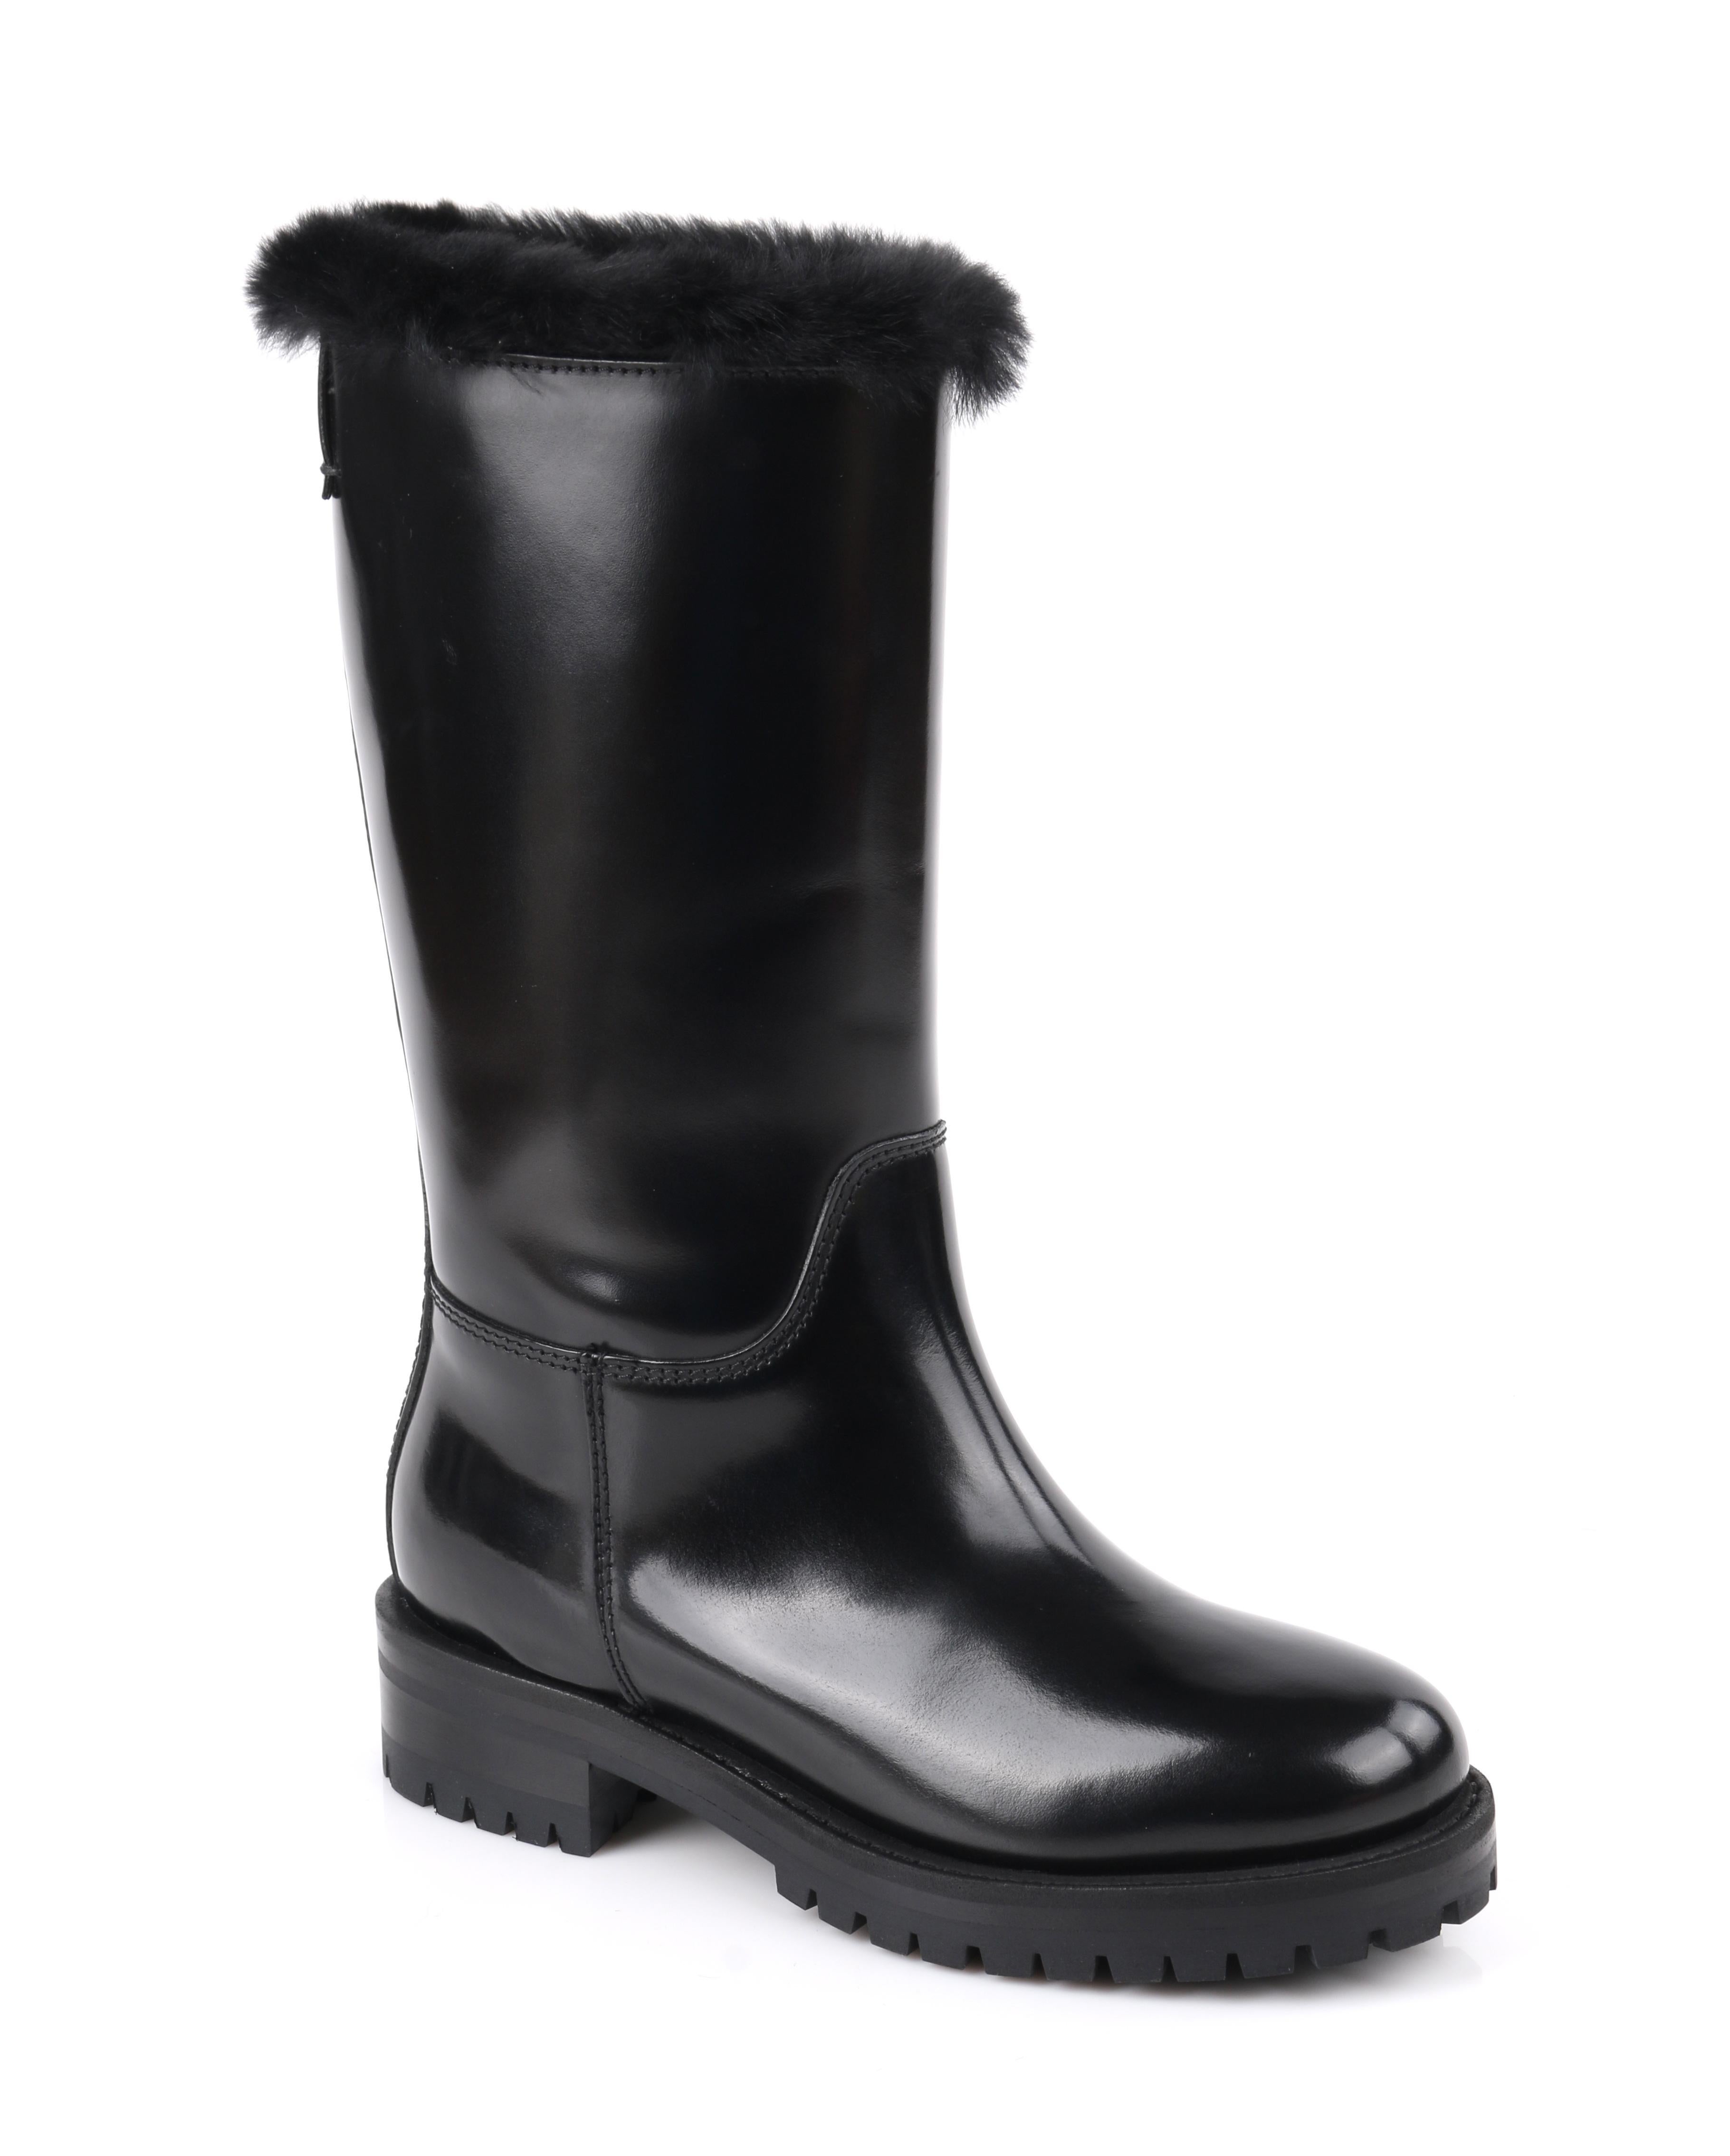 DOLCE & GABBANA Black Leather Lapin Fur Lined Calf High Moto Cold Weather Boots 
 
Estimated Retail: $990
 
Brand / Manufacturer: Dolce & Gabbana 
Designer: Dominico Dolce & Stefan Gabbana
Style: Boots
Color(s): Black 
Unmarked Materials: Leather